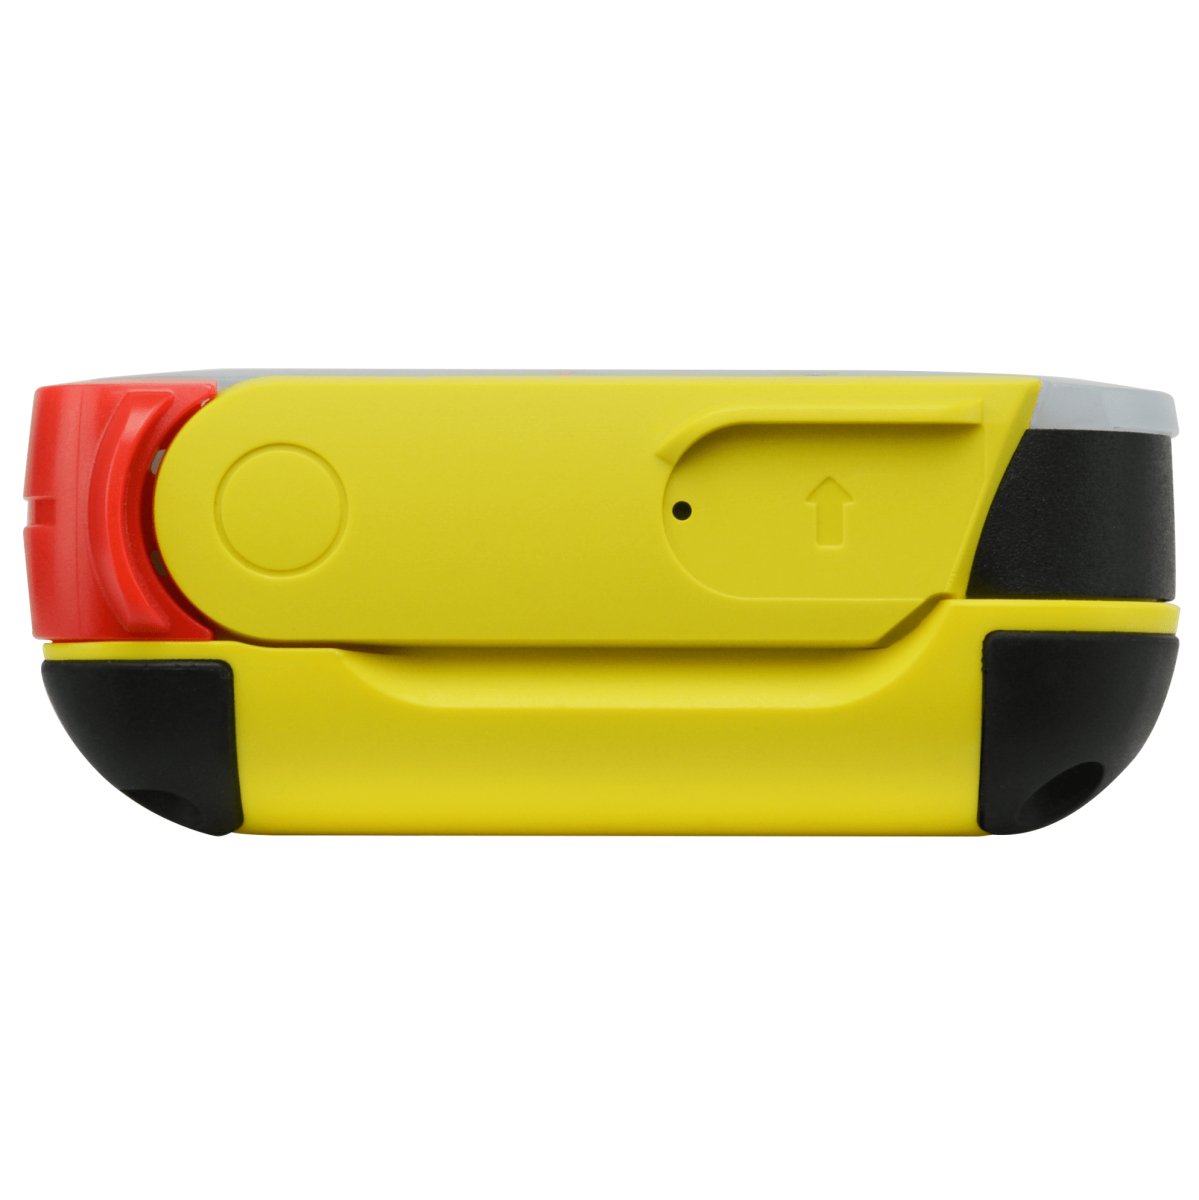 GME MT610G GPS PERSONAL LOCATOR BEACON (PLB) with Case | GME | A247 Gear